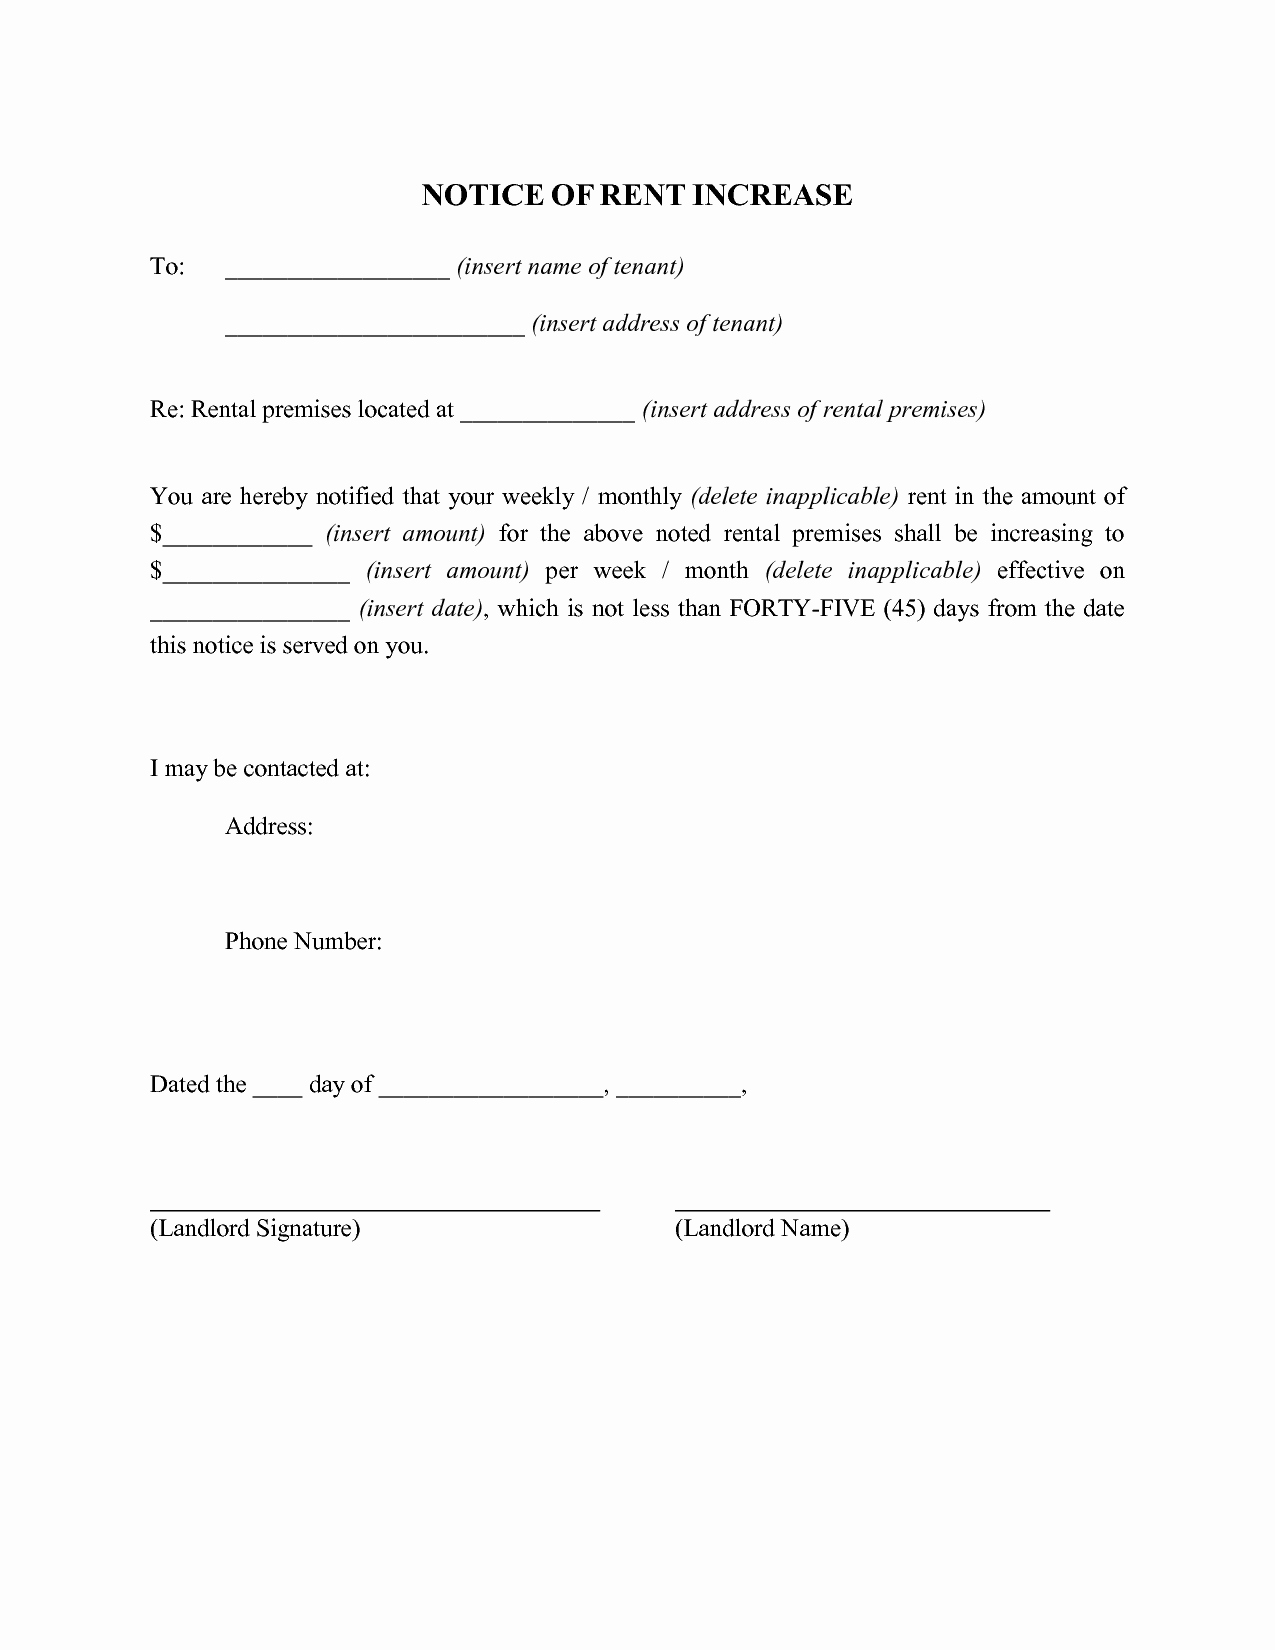 Rent Increase Letter Templates Best Of Coverletterexamples Part 30 Rent Increase Sample